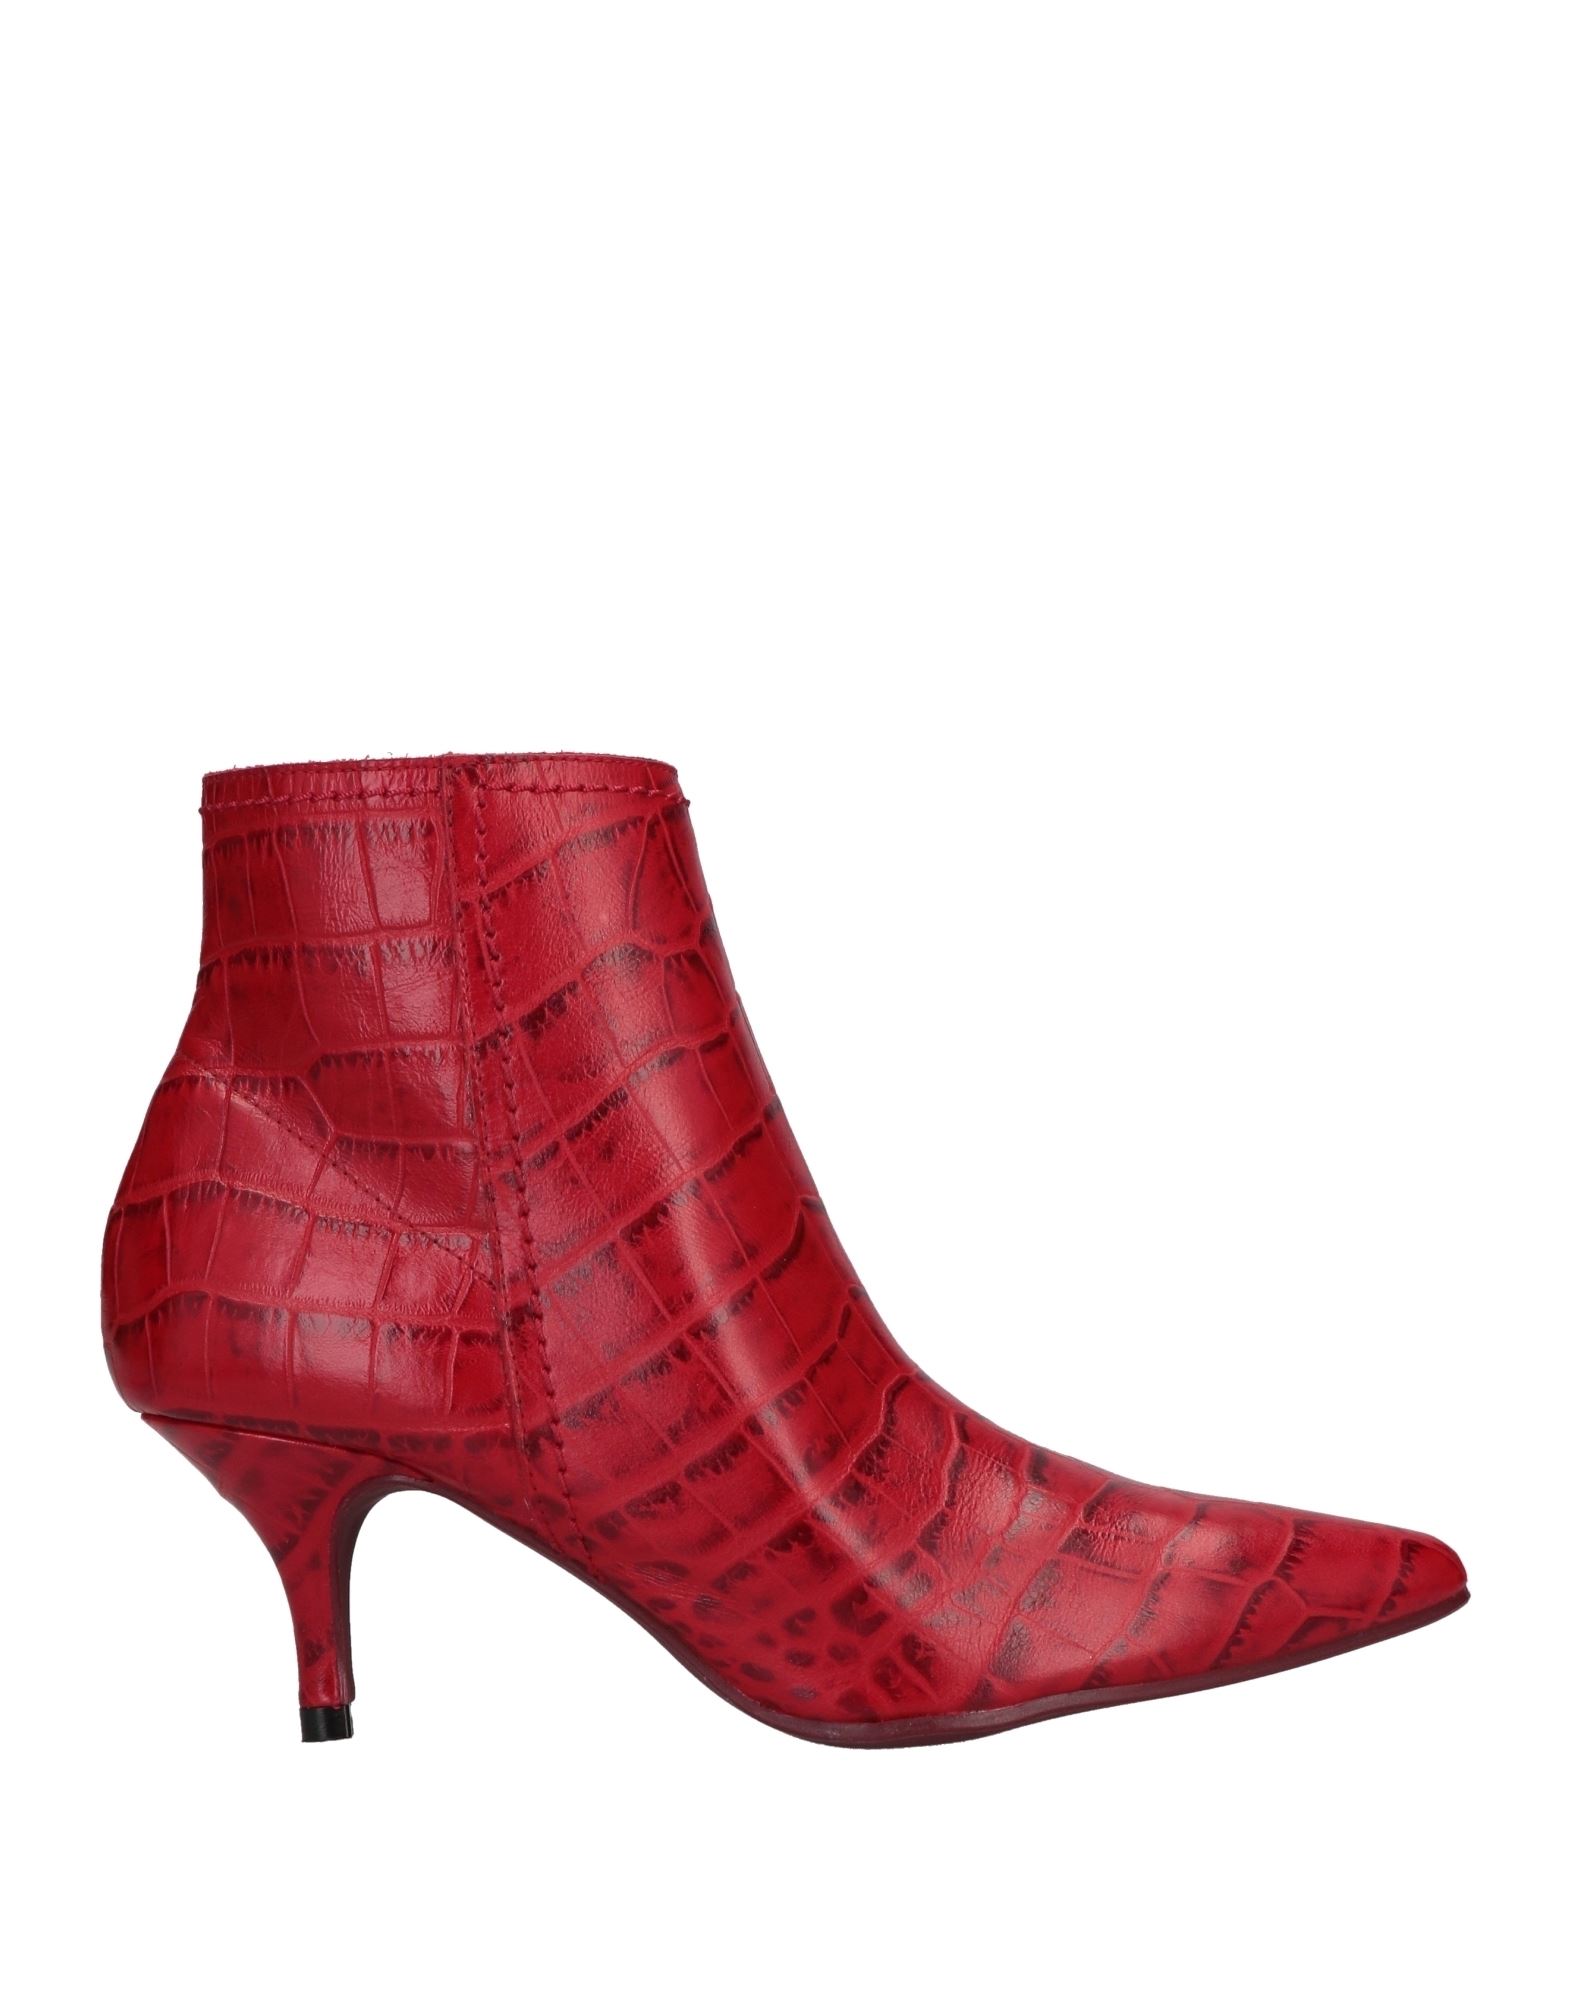 Daniele Ancarani Ankle Boots In Red